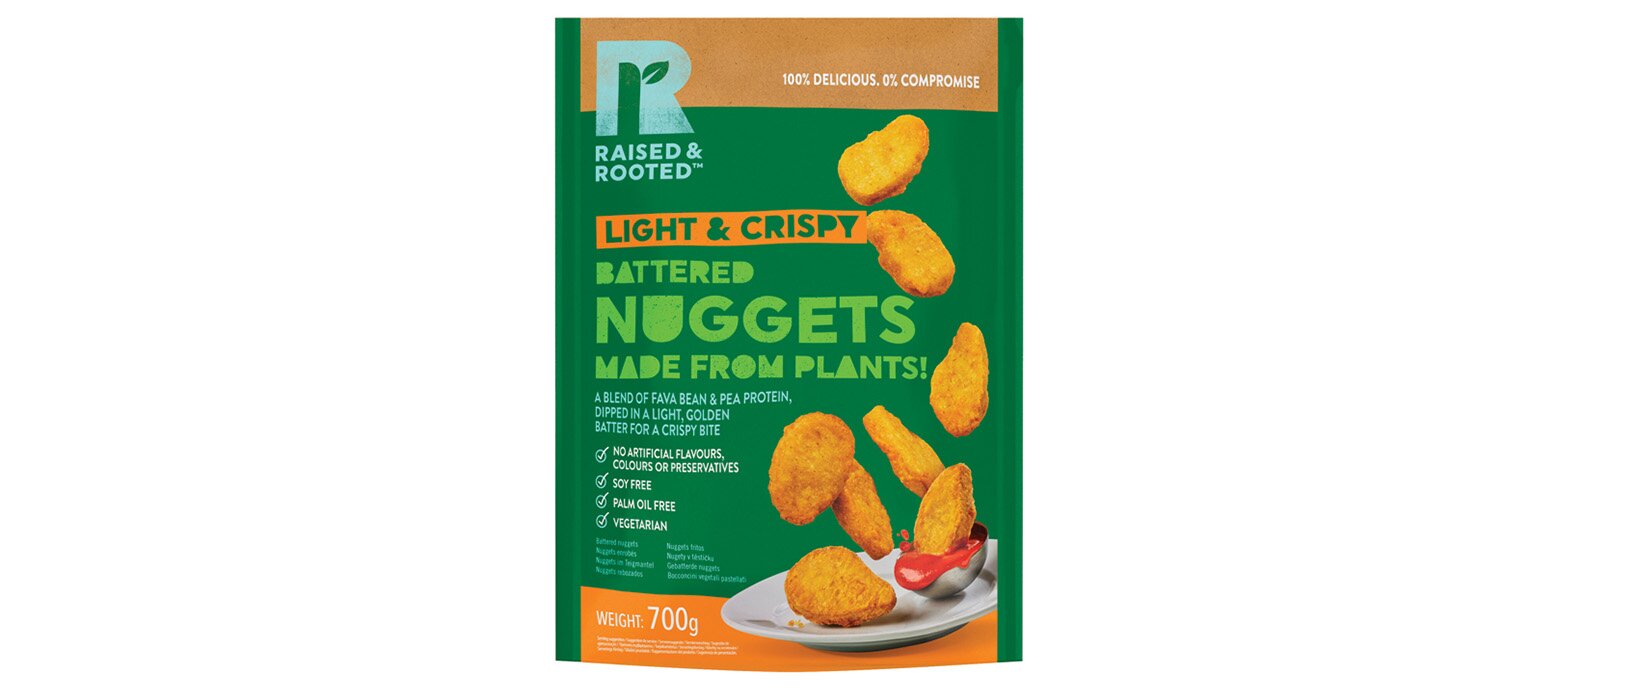 Tyson Foods Raised & Rooted brand unveiled in the UK